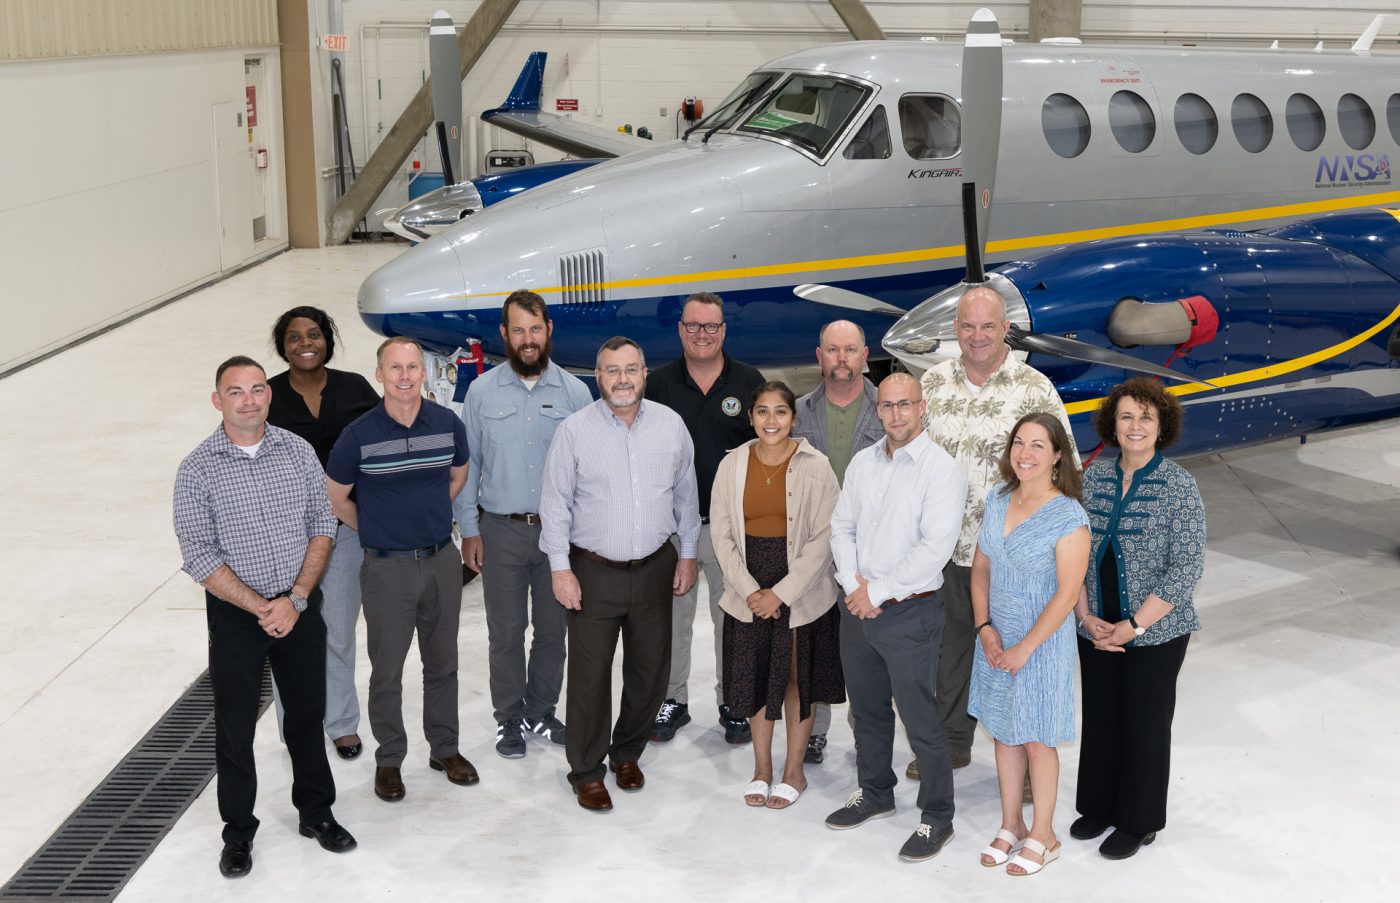 Twelve smiling people stand in front of a aircraft inside an aviation hangar.